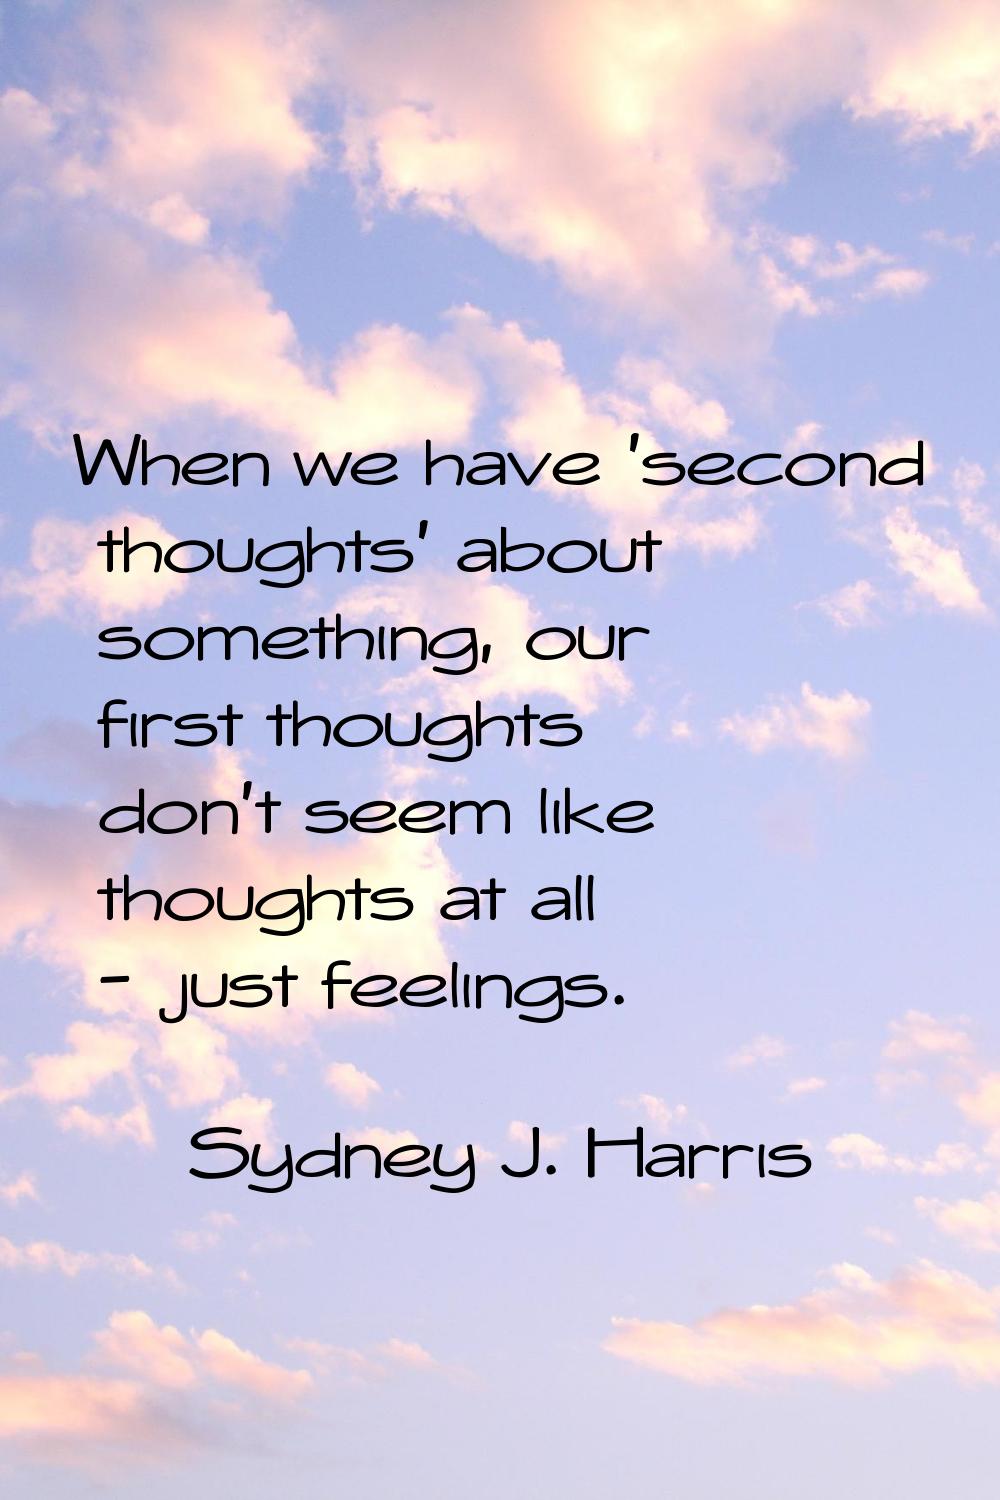 When we have 'second thoughts' about something, our first thoughts don't seem like thoughts at all 